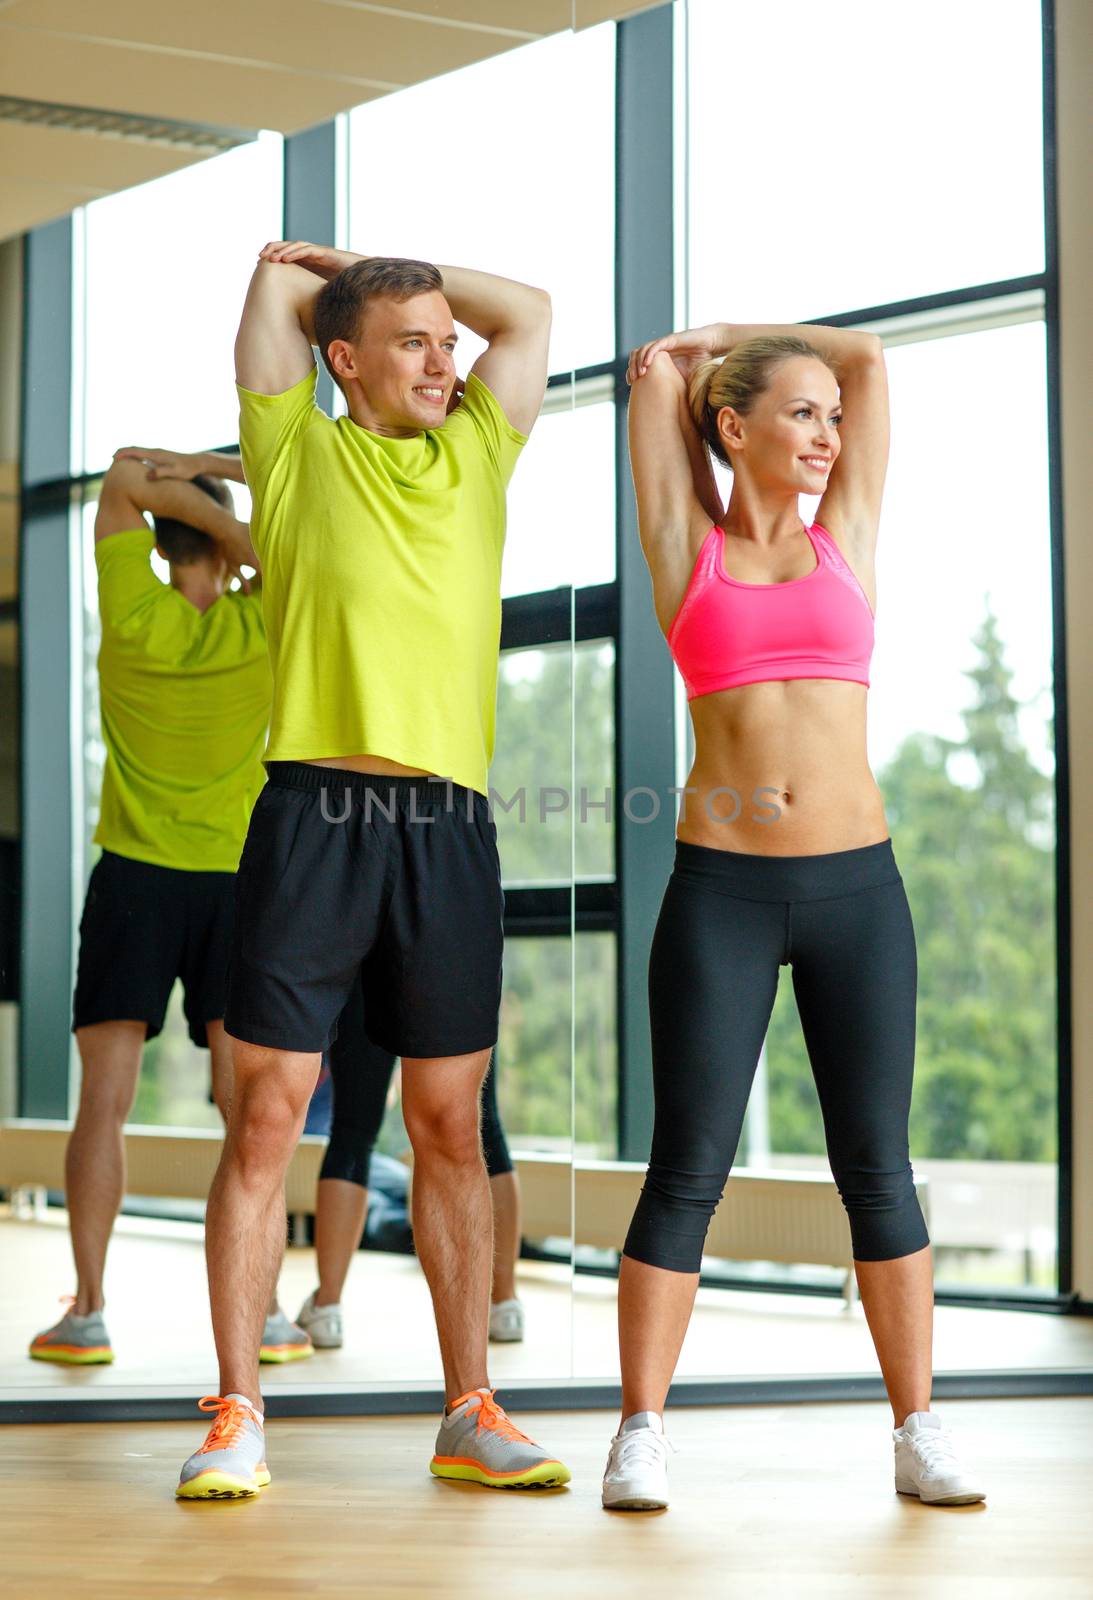 smiling man and woman exercising in gym by dolgachov